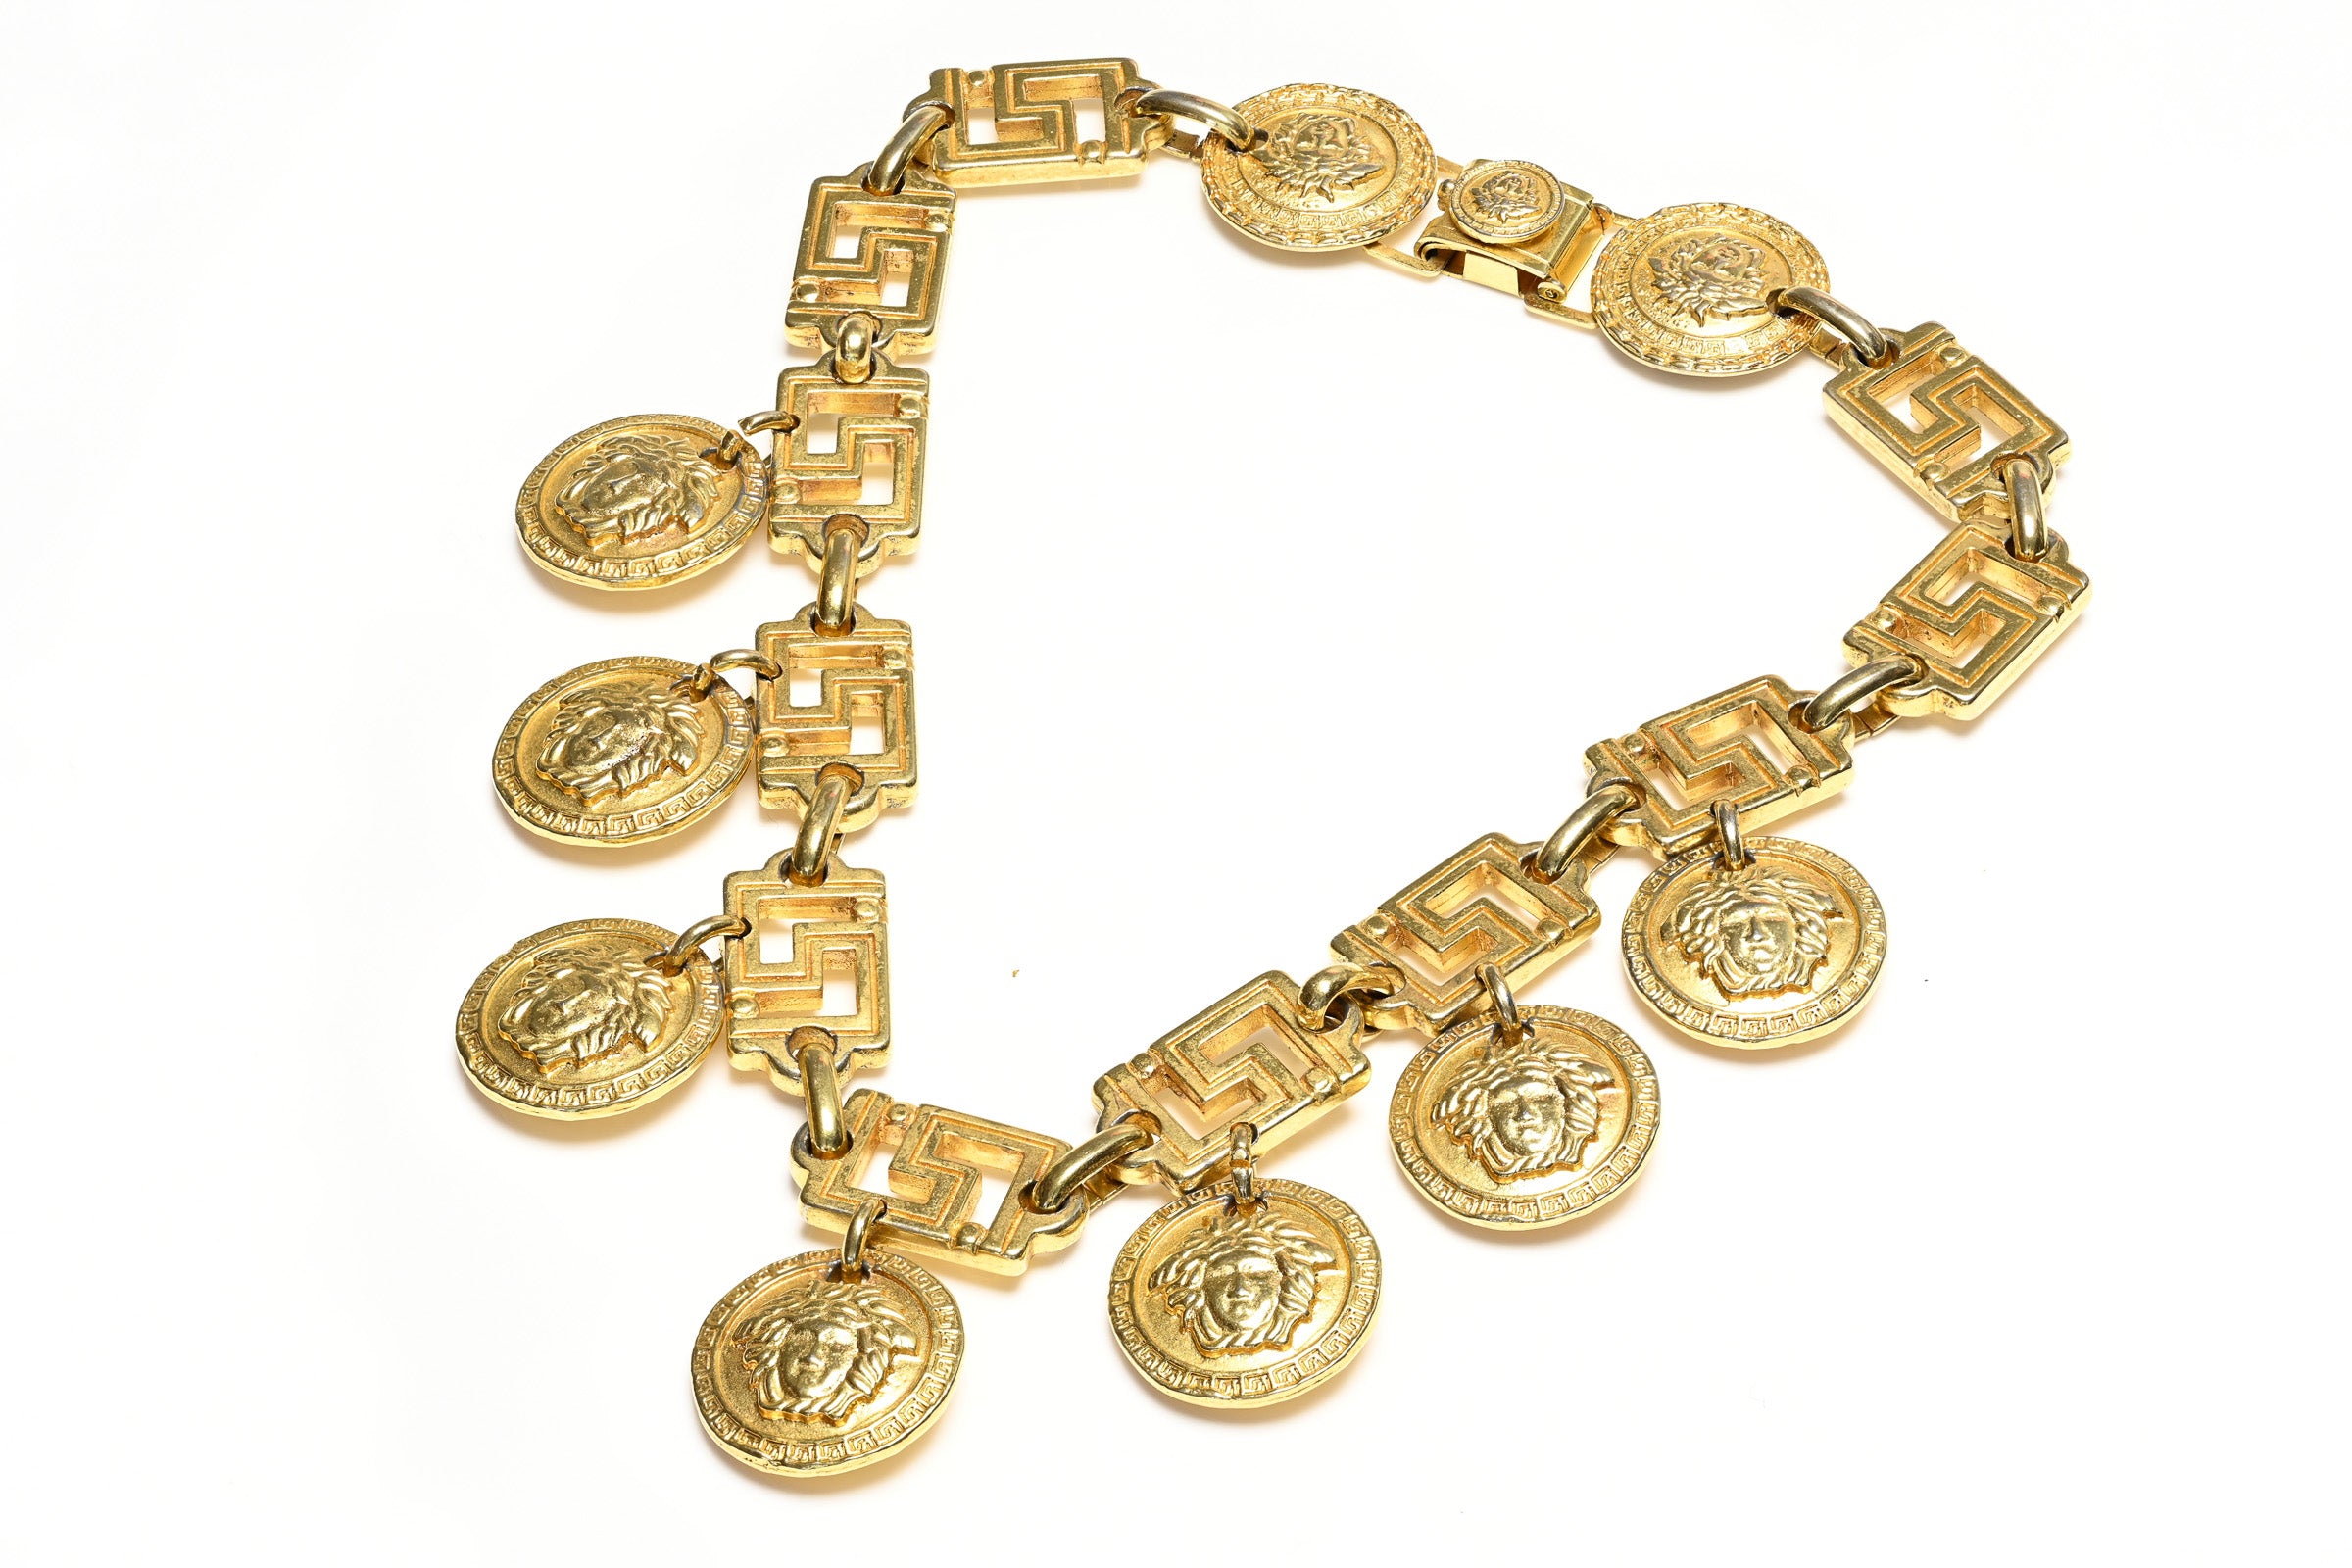 Vintage 1990's Gianni Versace Gold Plated Medusa Coin Tassel Necklace